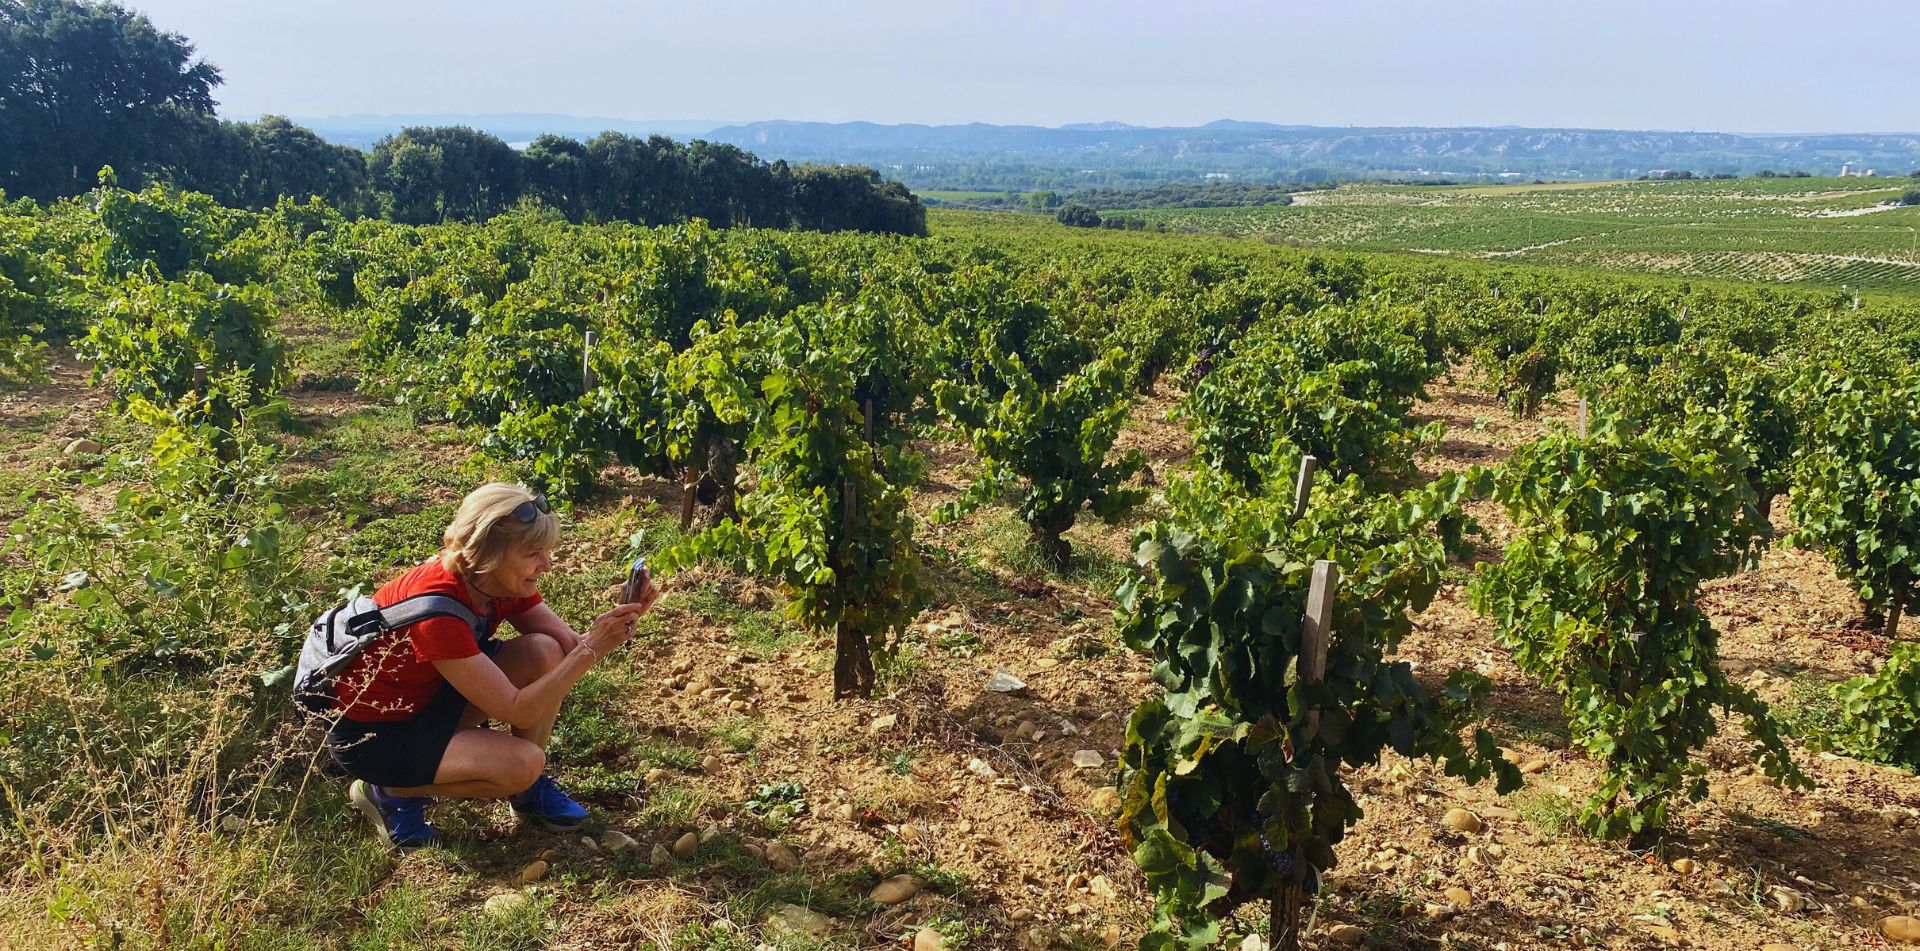 3 - Stroll through the vineyards of Châteauneuf-du-Pape on your way to a wine tasting